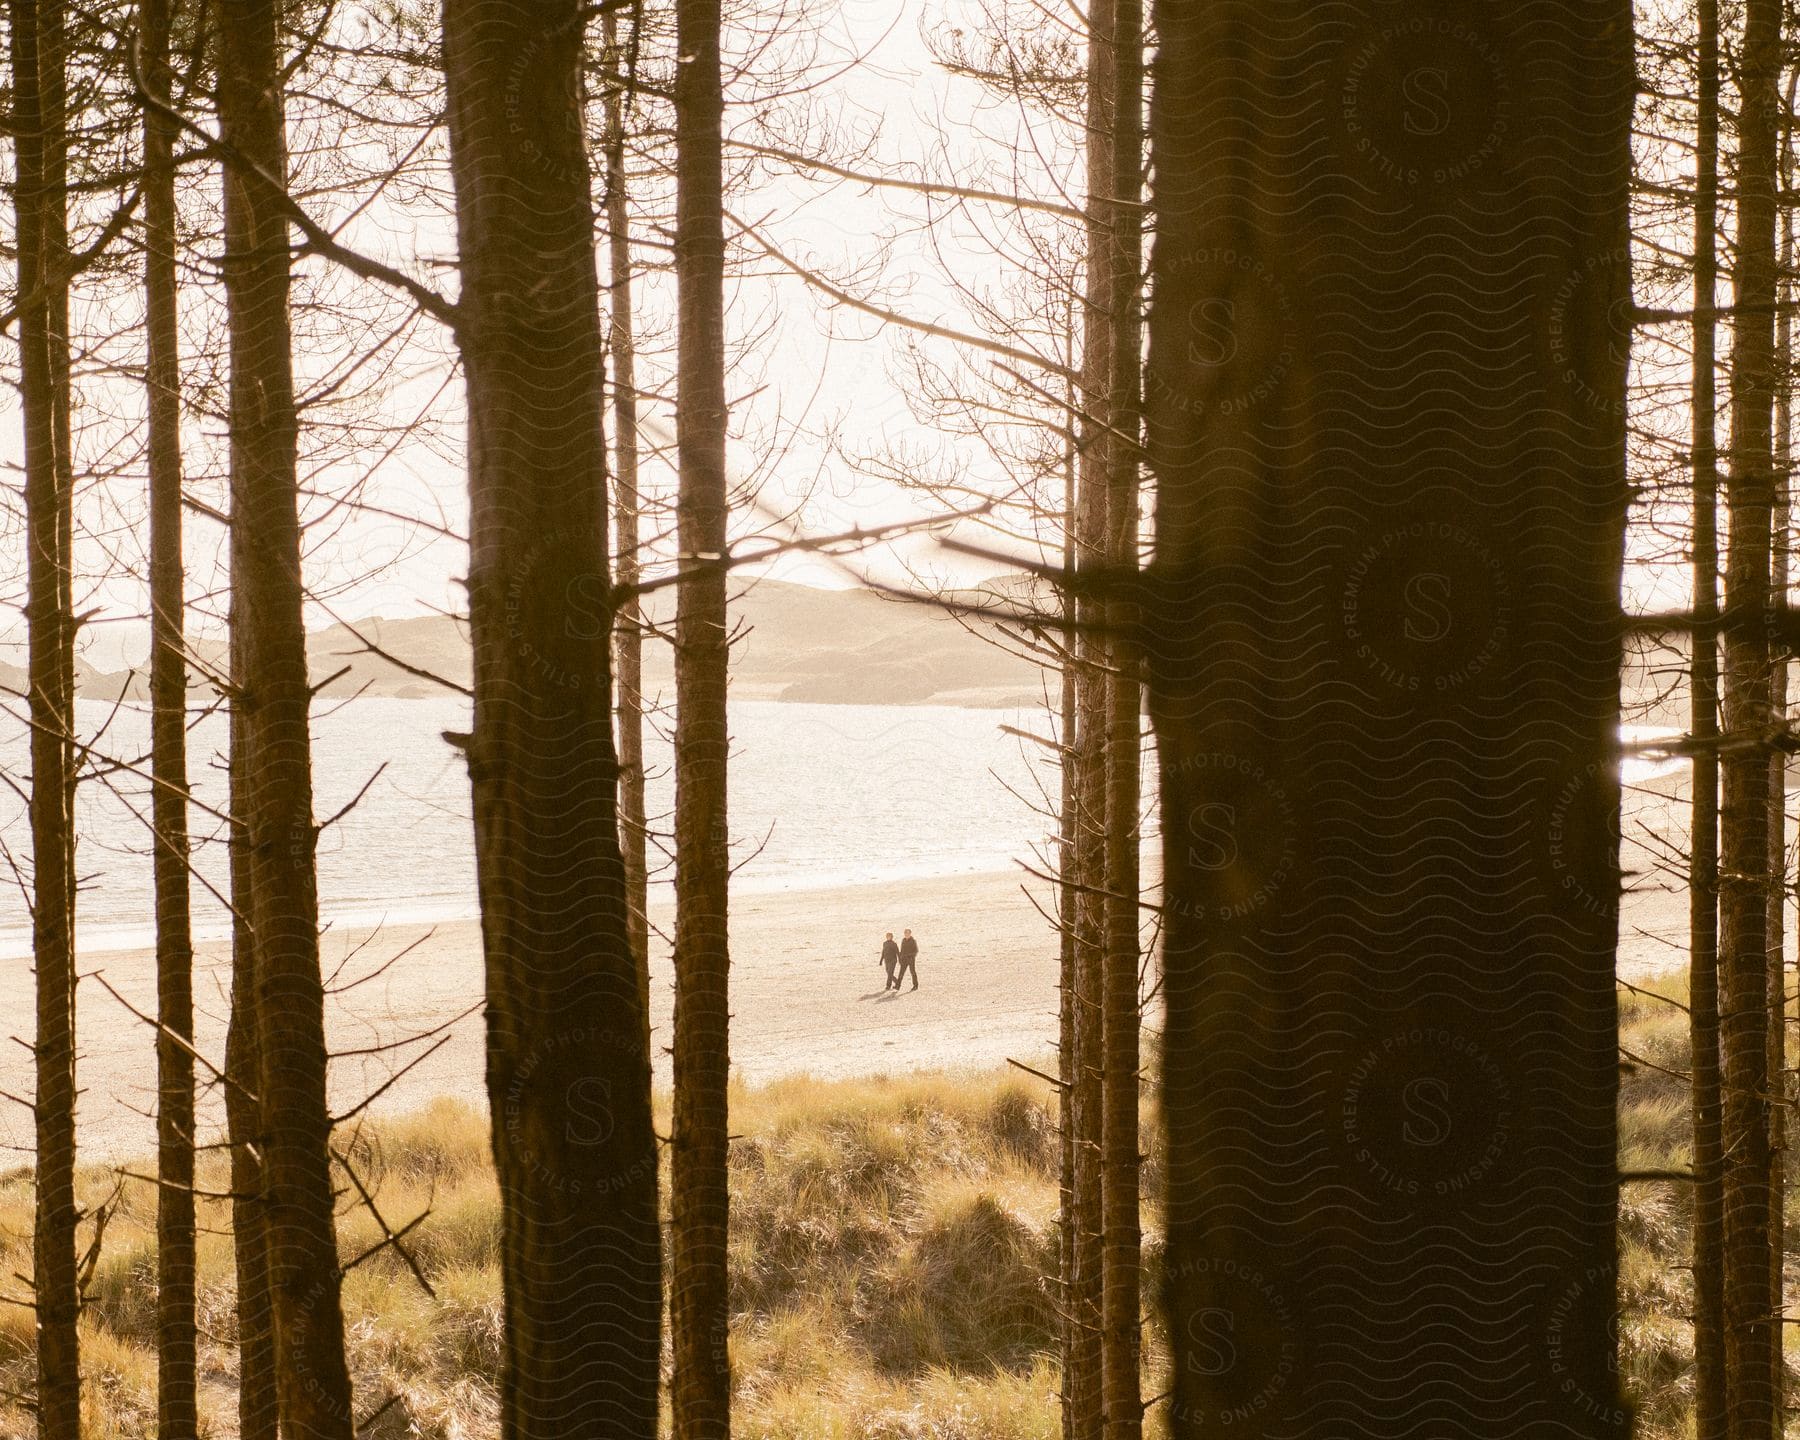 Two people walking on a beach seen through a forest silhouette.